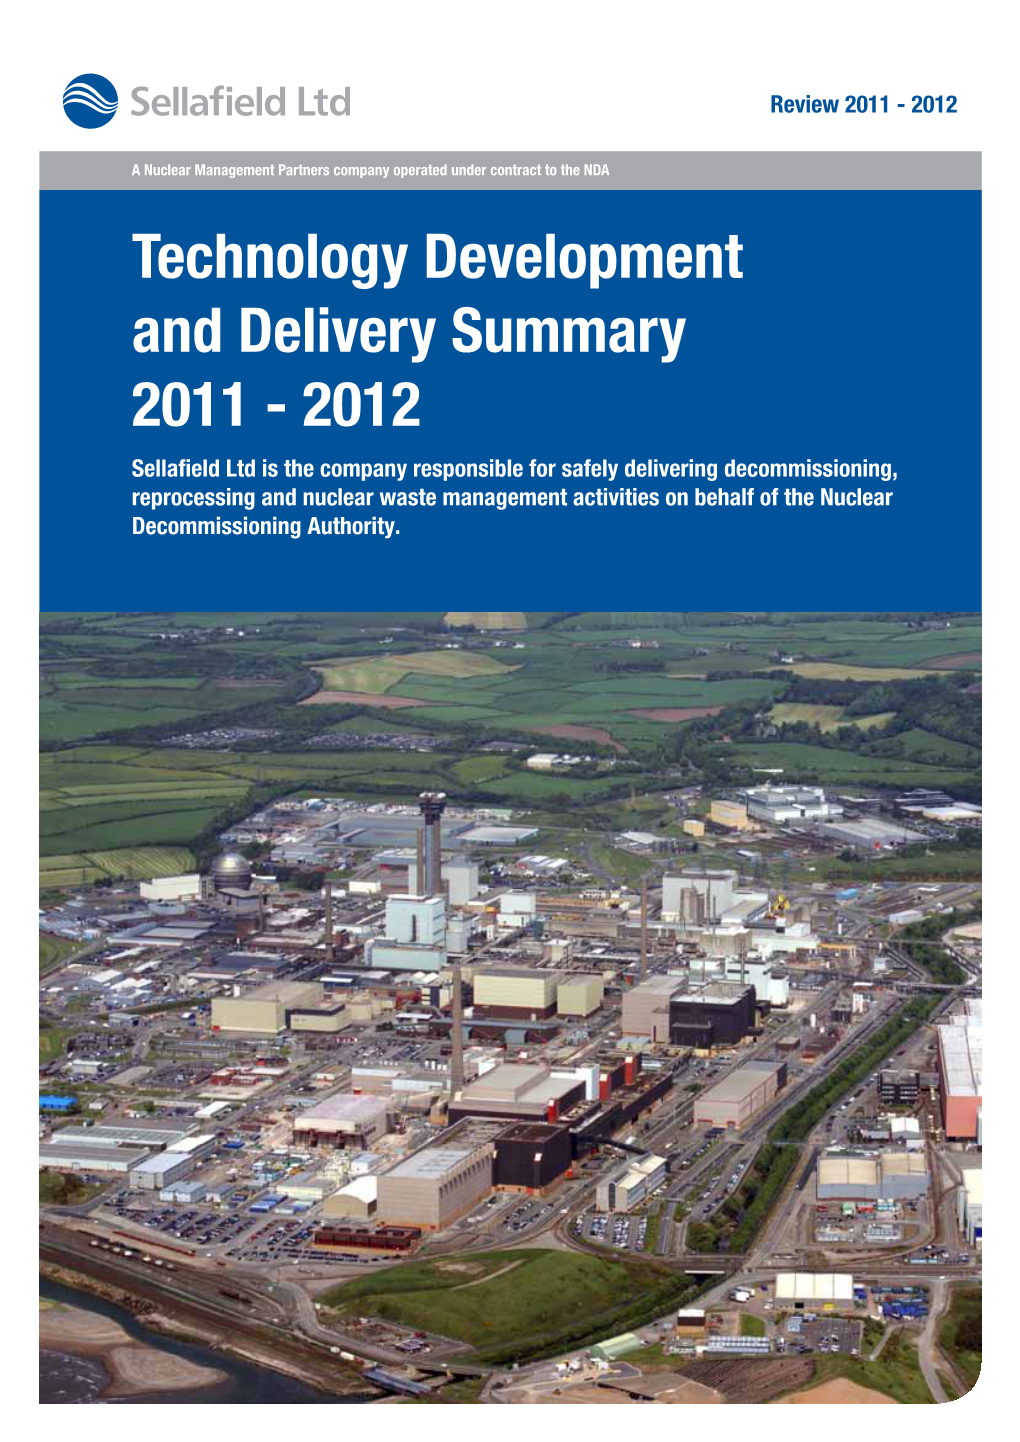 Technology Development and Delivery Summary 2011